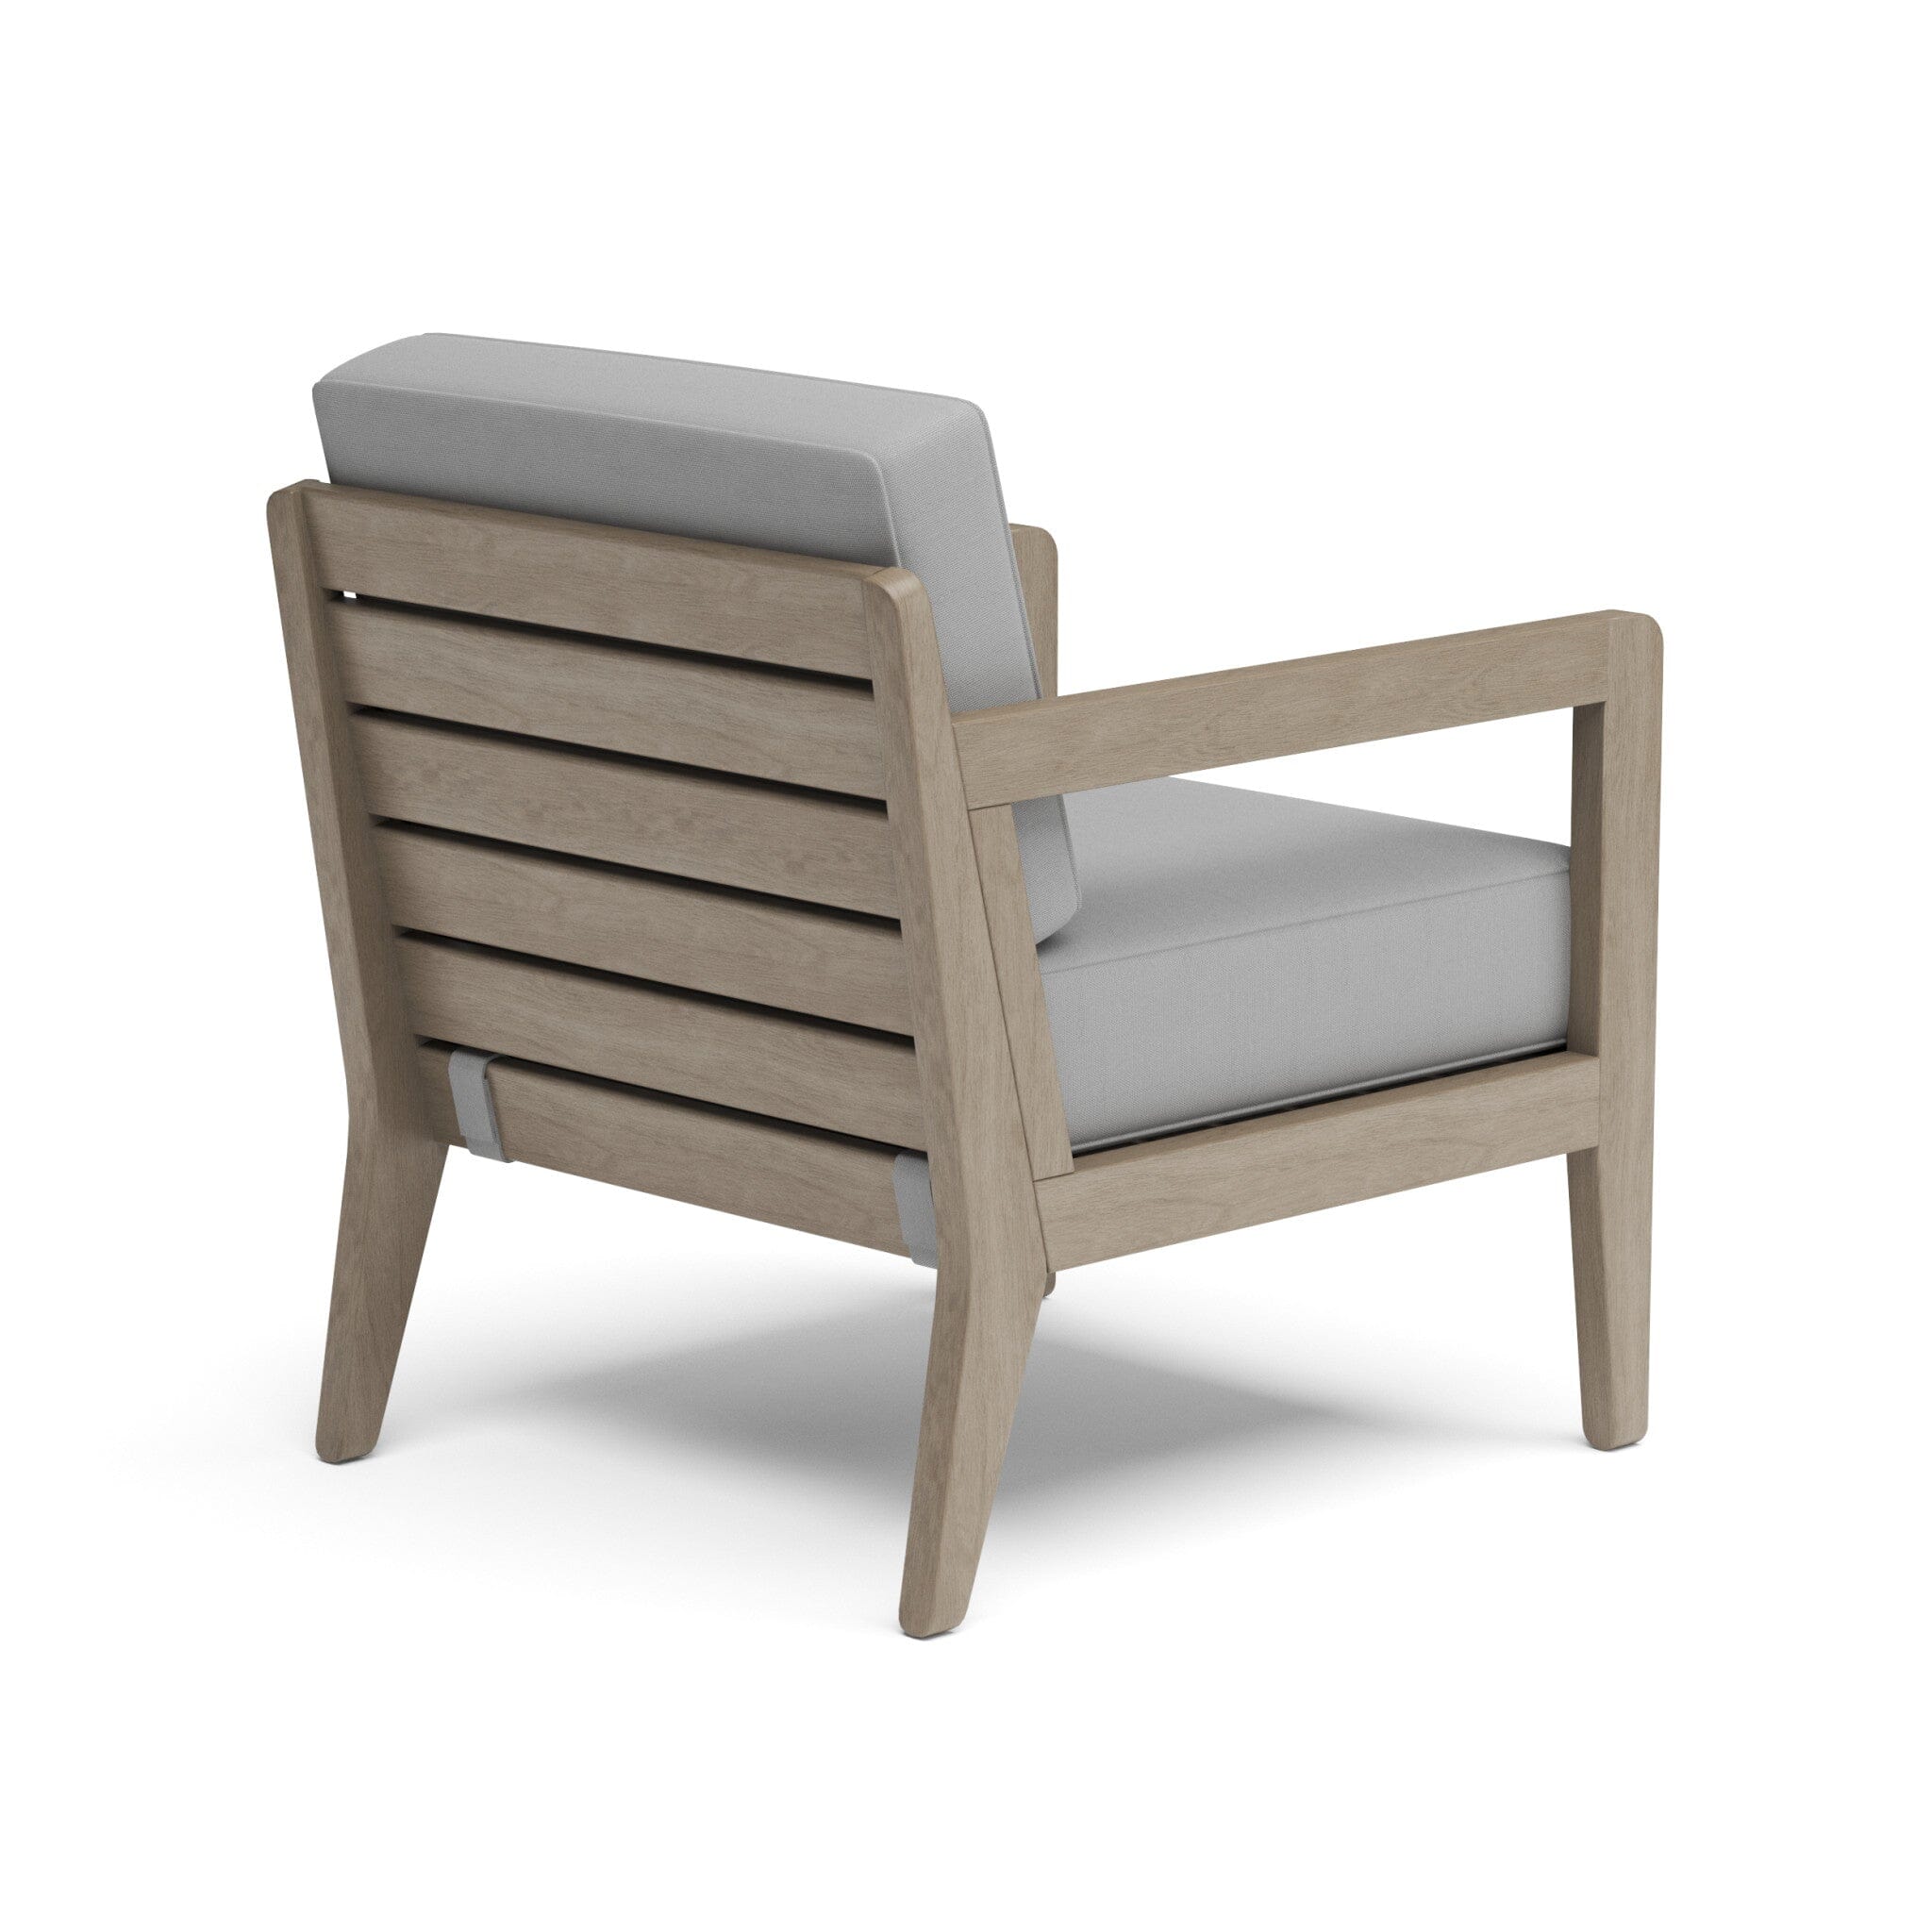 Transitional Outdoor Lounge Armchair By Sustain Outdoor Chair Sustain